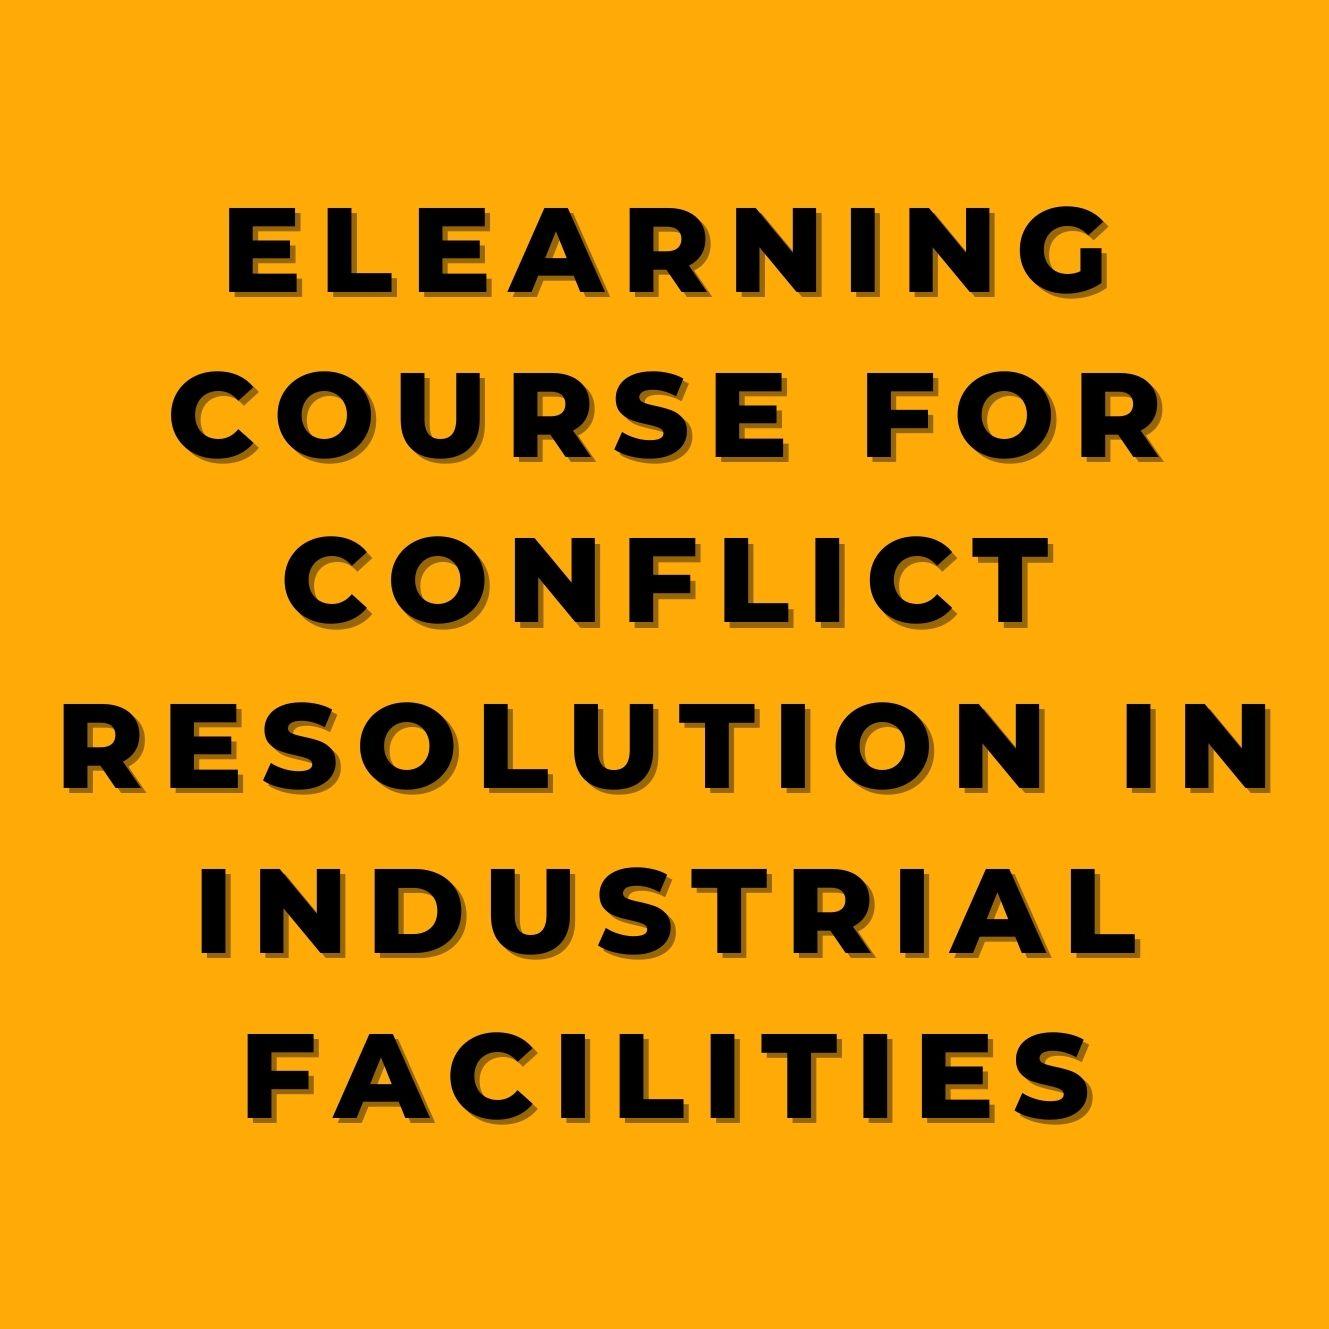 eLearning Course for Conflict Resolution in Industrial Facilities